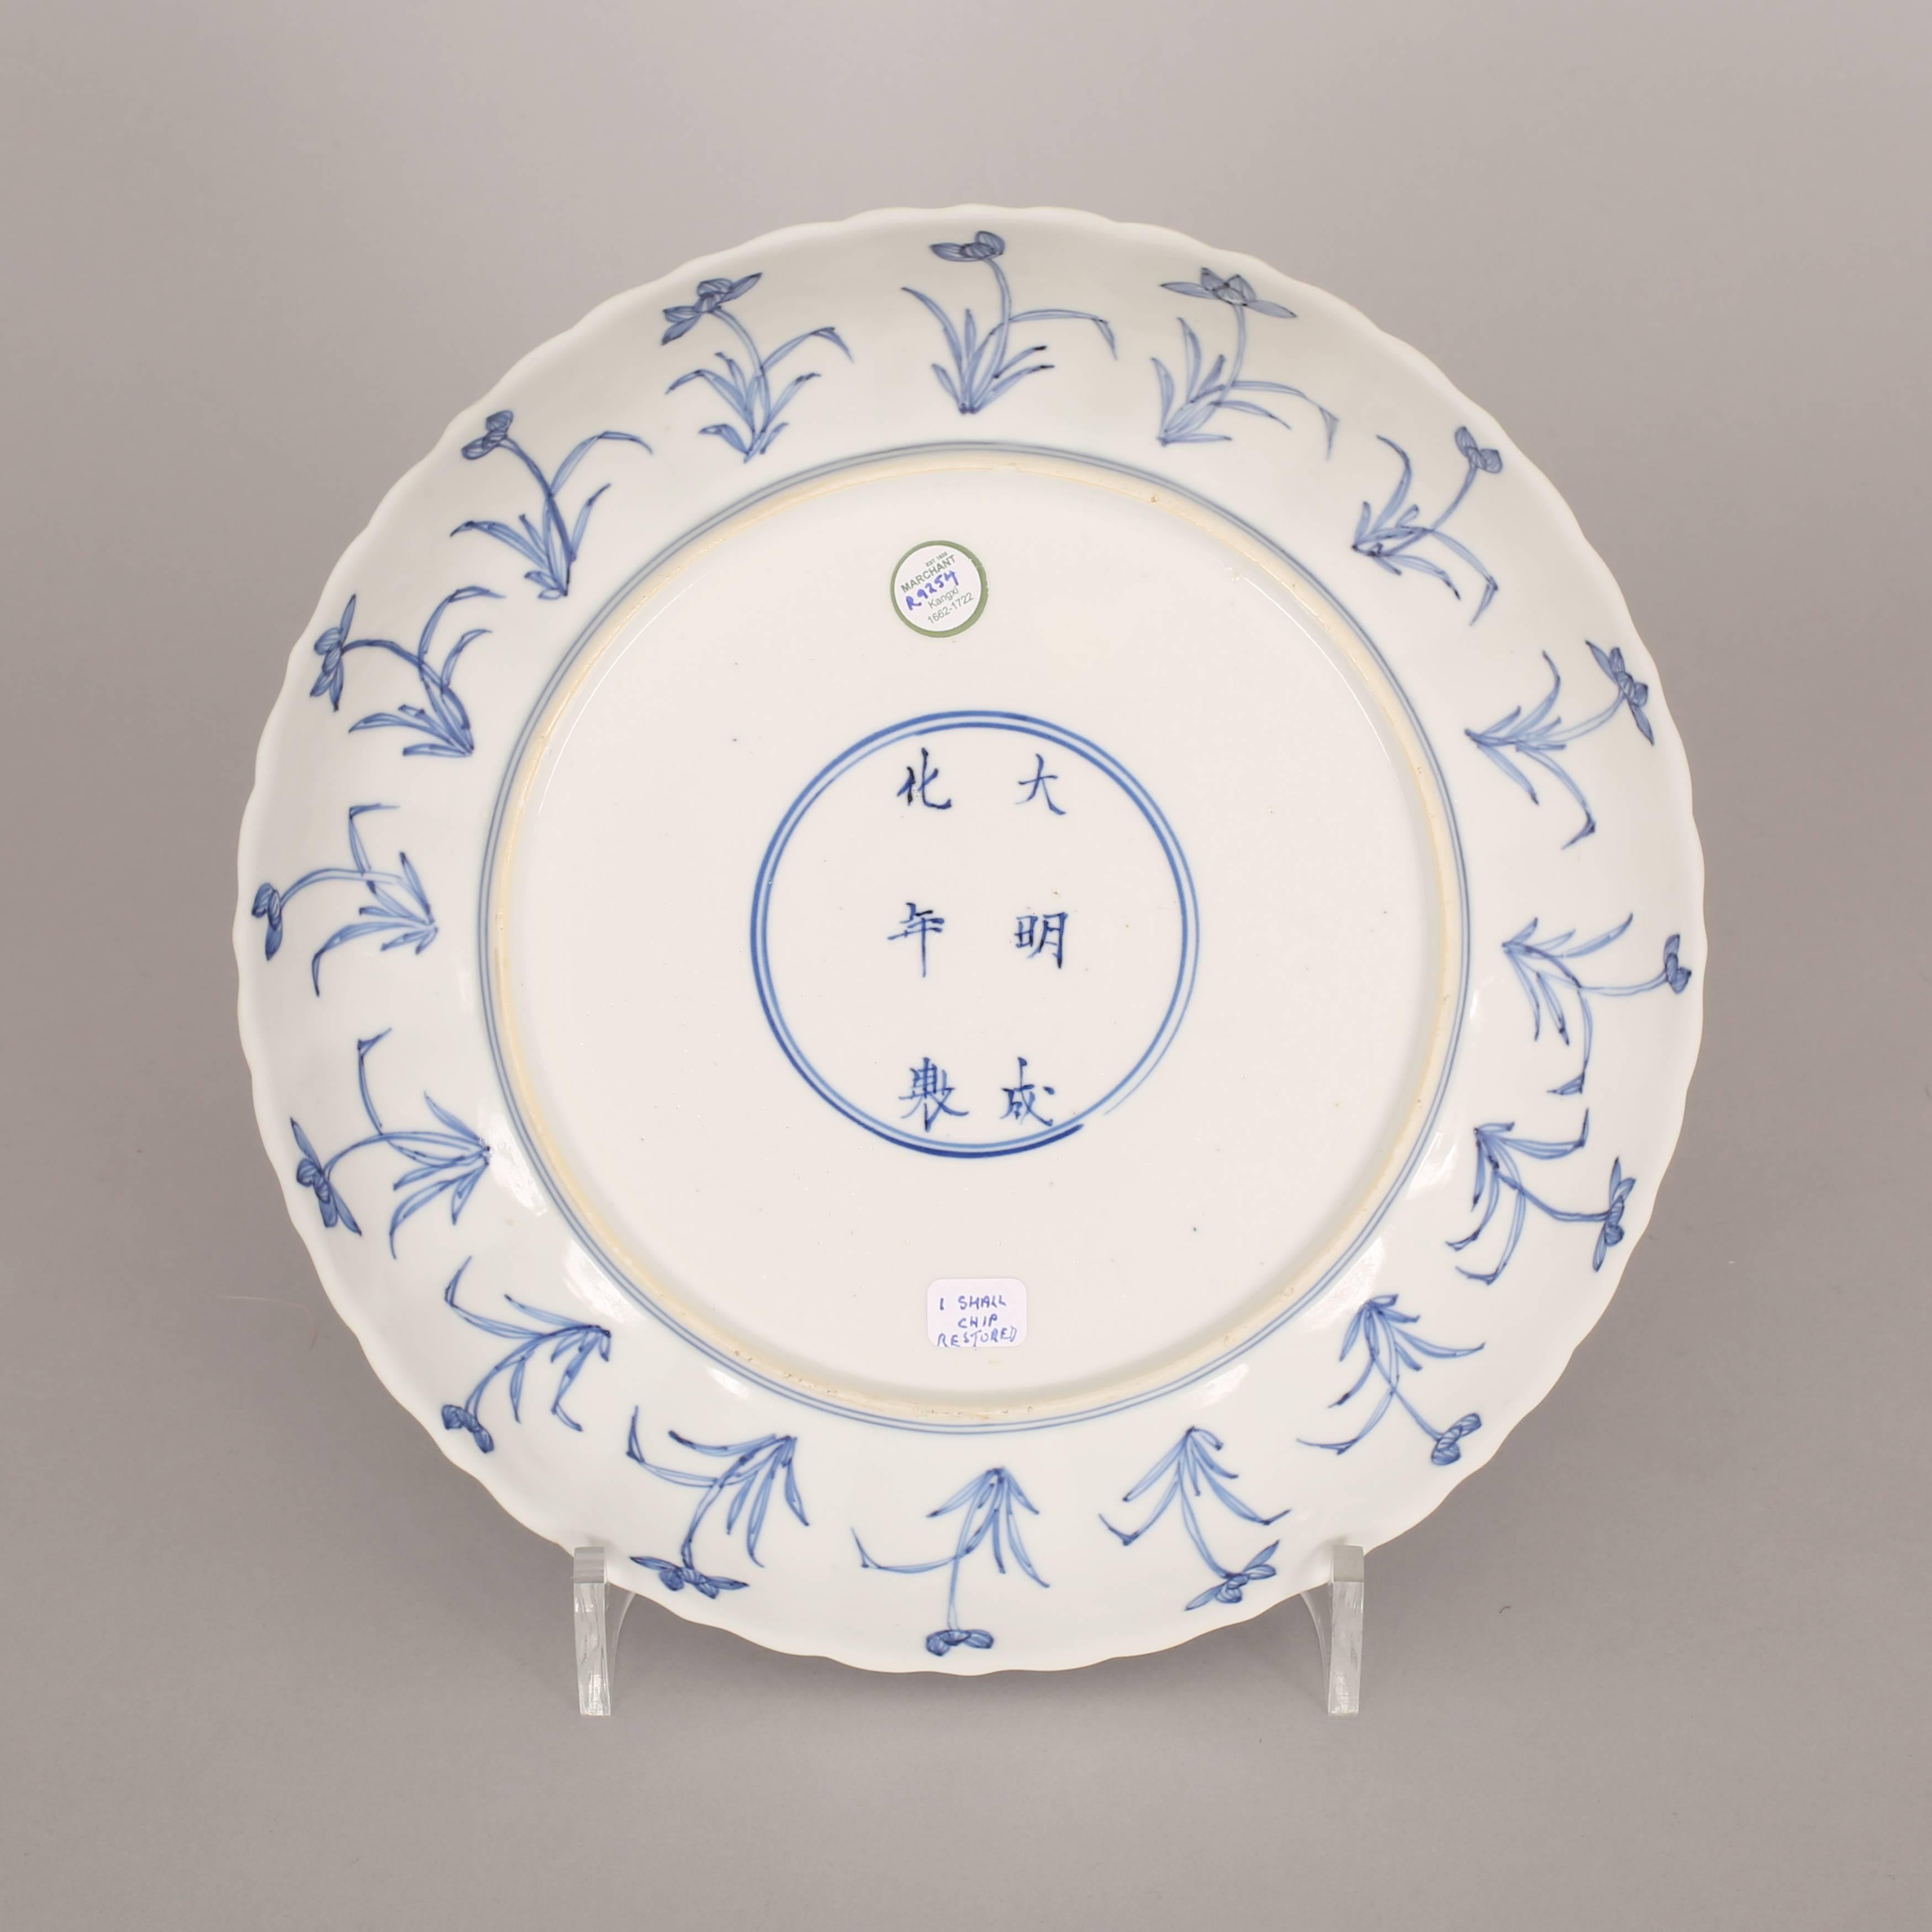 Qing Chinese Porcelain Blue and White Saucer Dish with Hunting Scene, 17th Century For Sale